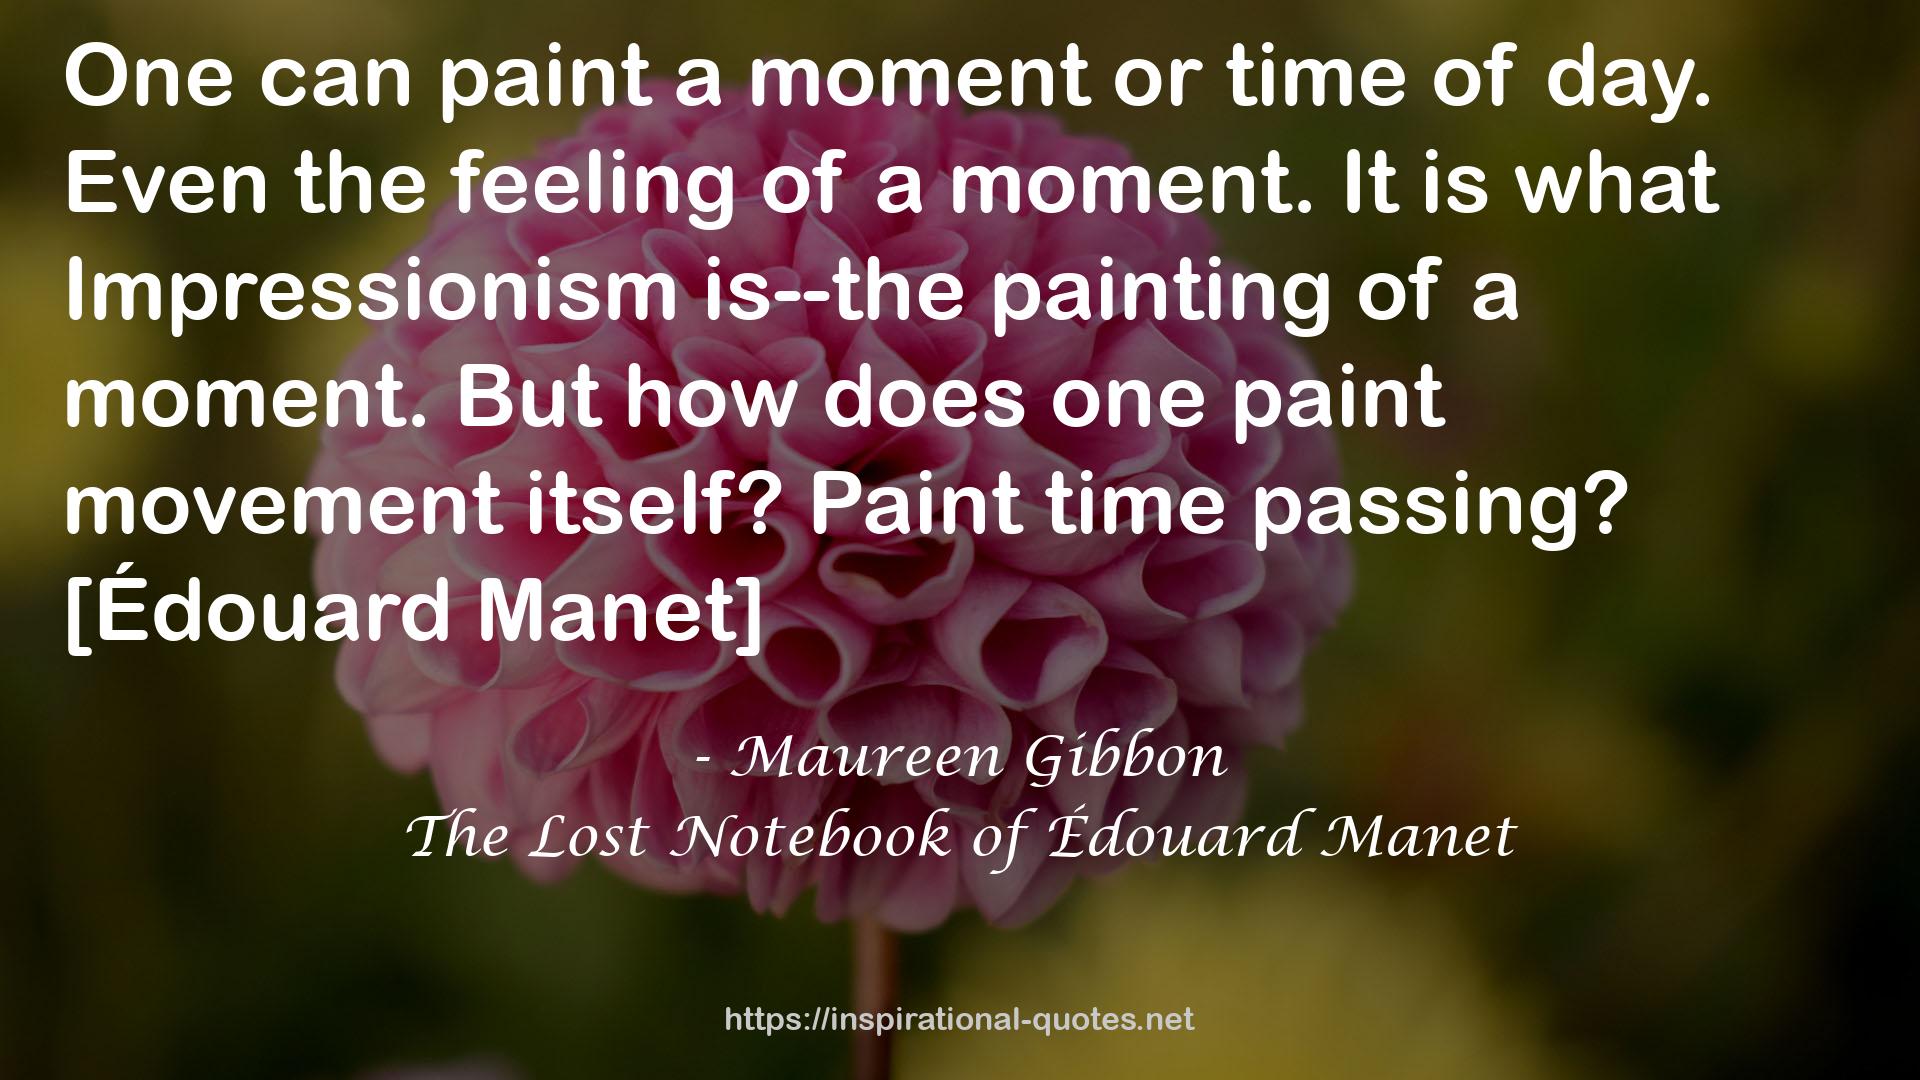 The Lost Notebook of Édouard Manet QUOTES